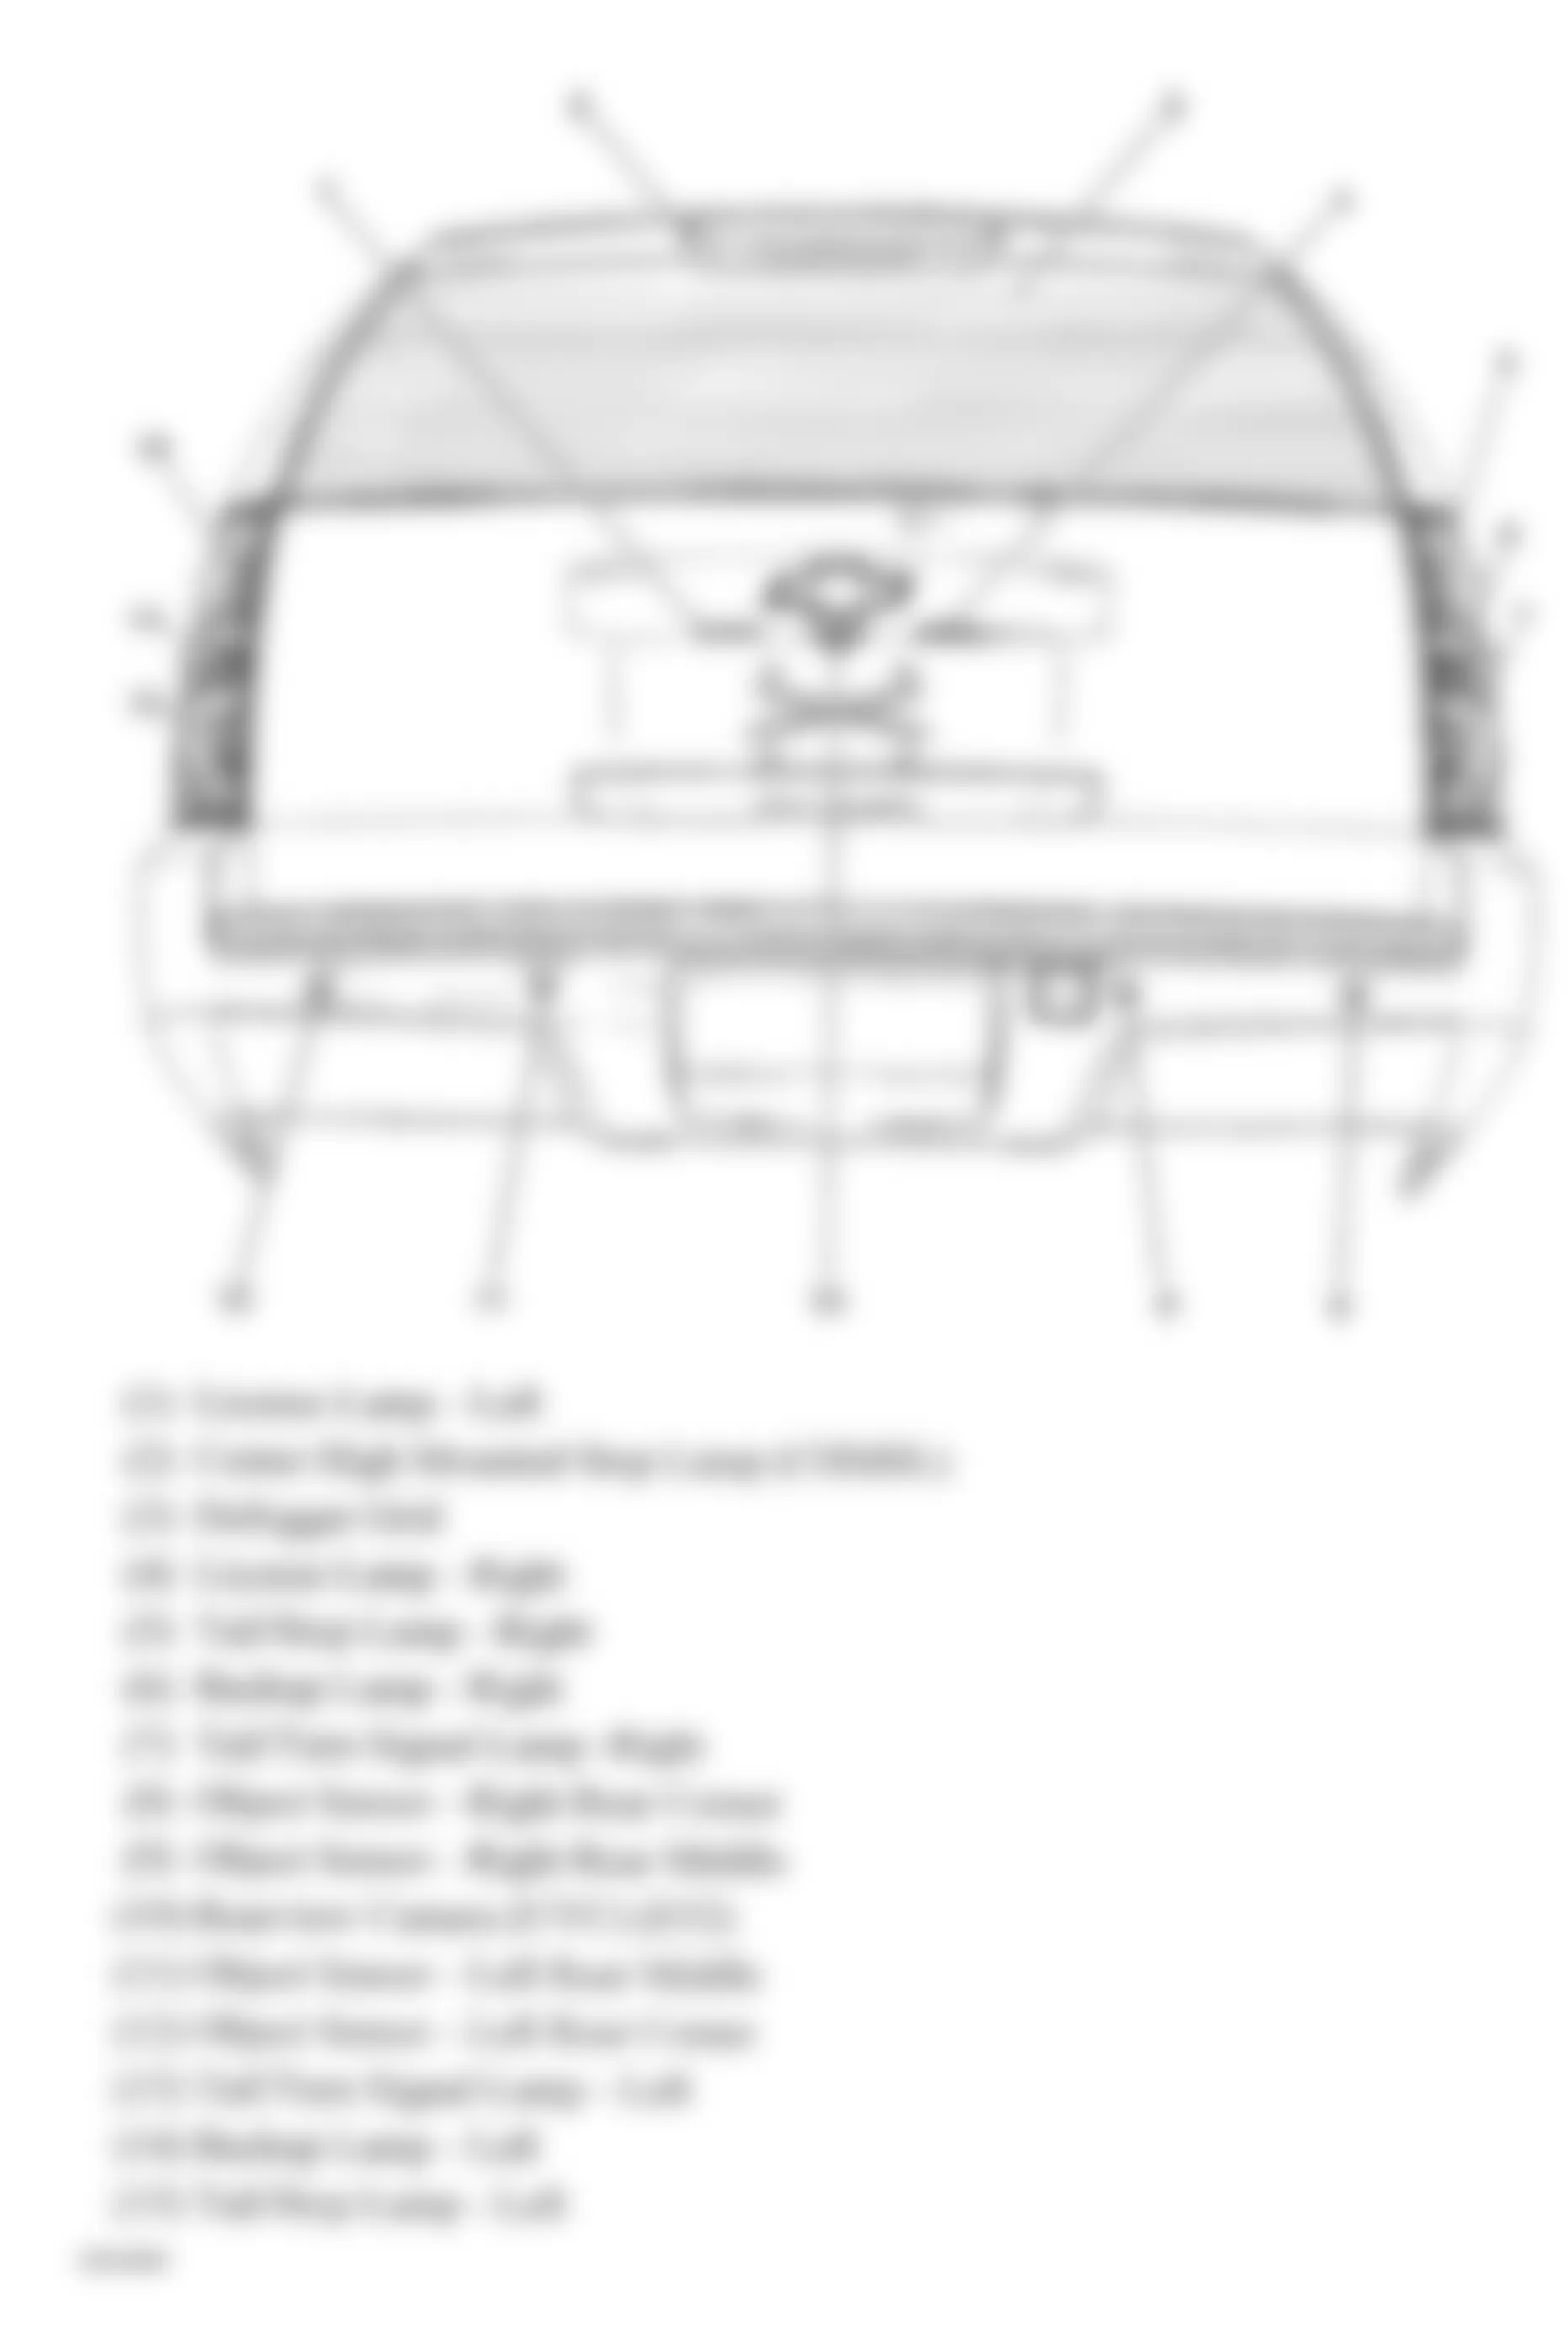 GMC Yukon 2010 - Component Locations -  Rear Of Vehicle (Avalanche, Suburban & Tahoe W/One Piece Liftgate)